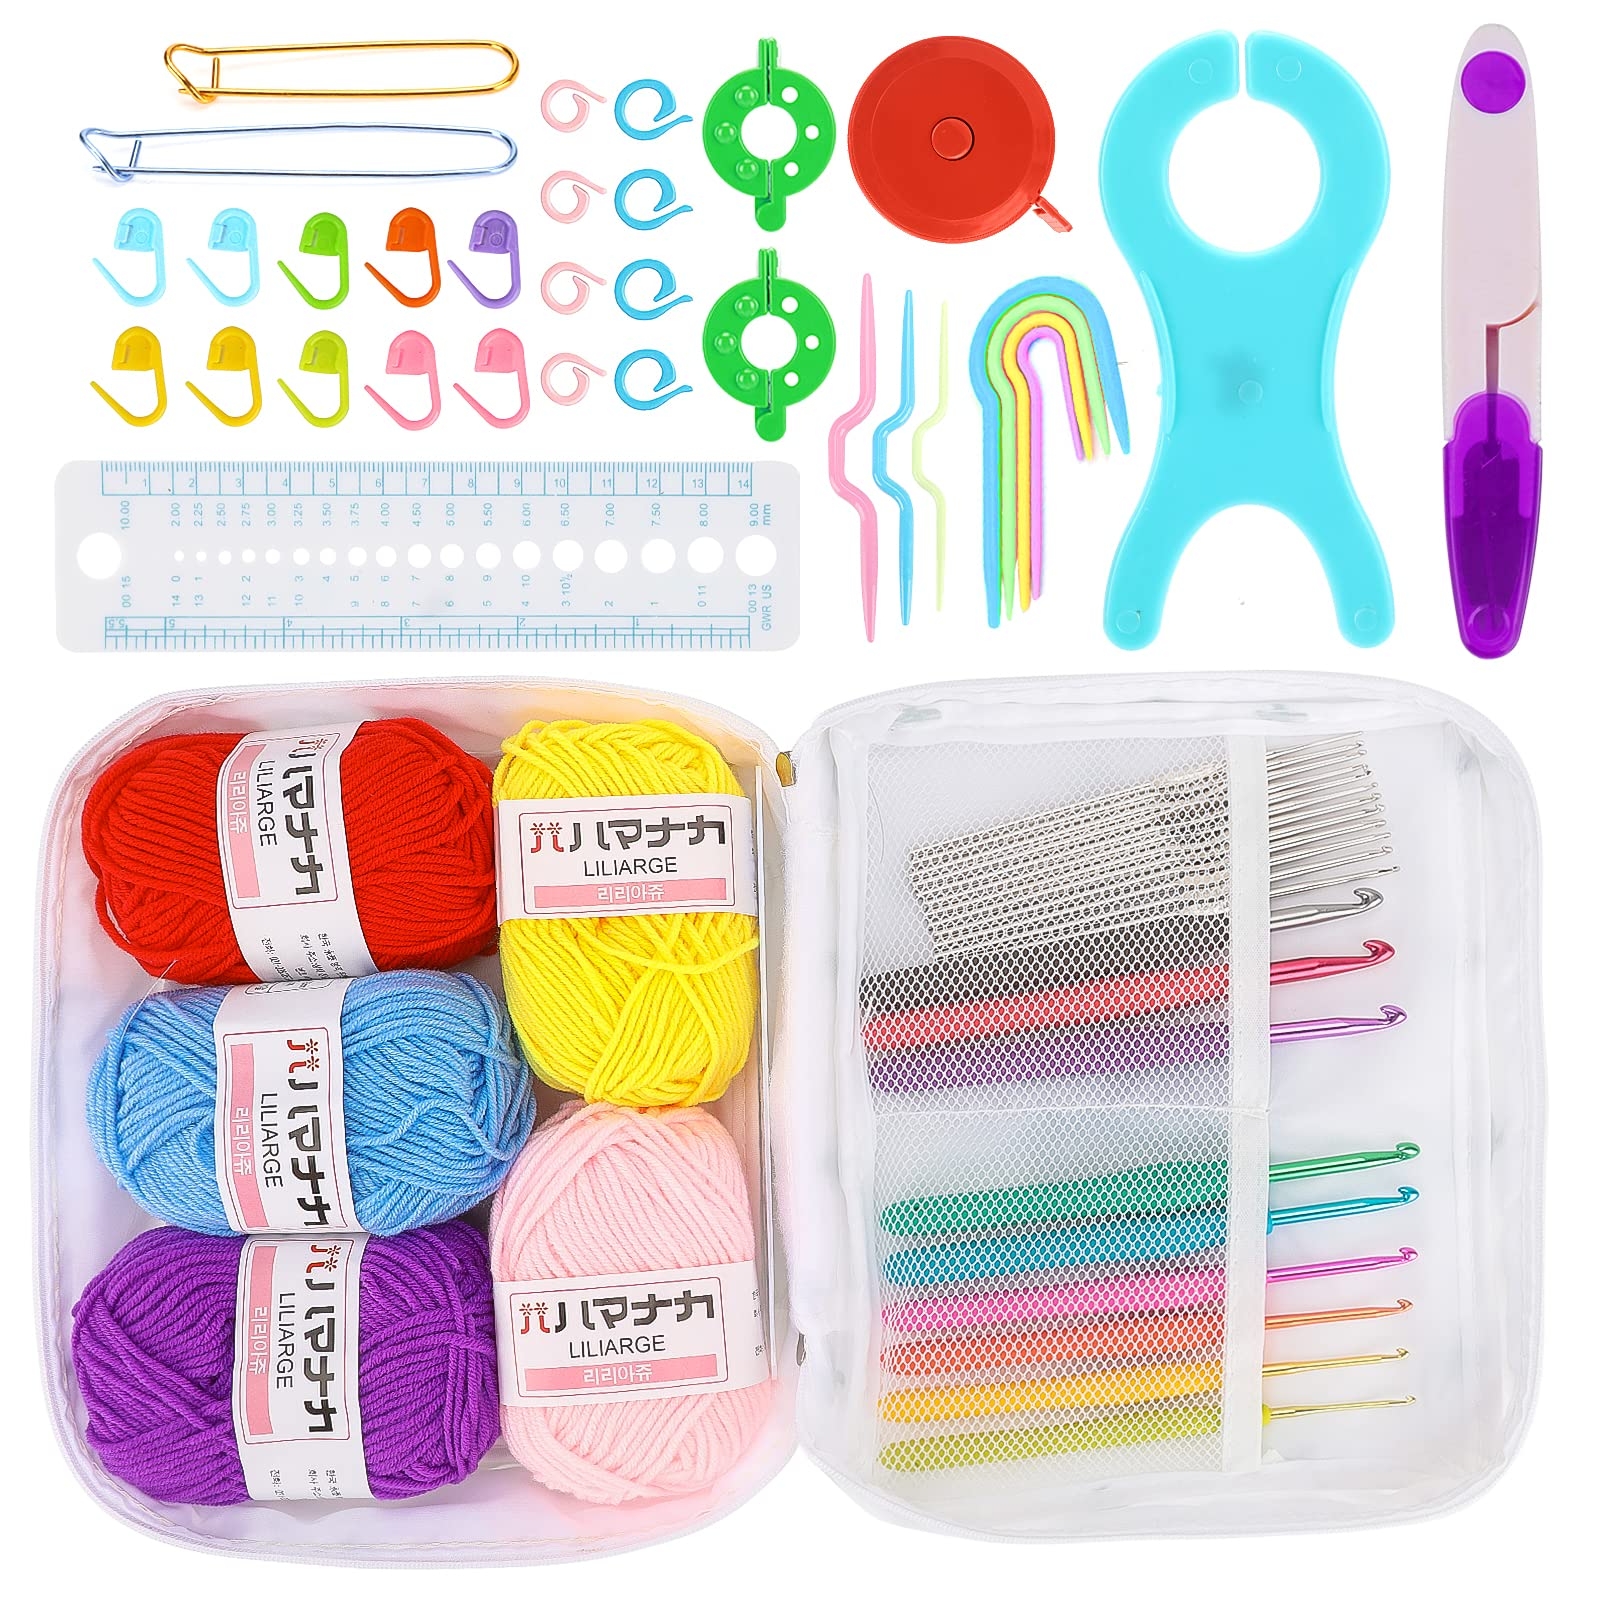 Organikway 60-pc Pink Crochet Kit for Beginners Adults & Kids Set with Videos and User Guides, Yarn, Hooks and All Required Accessories